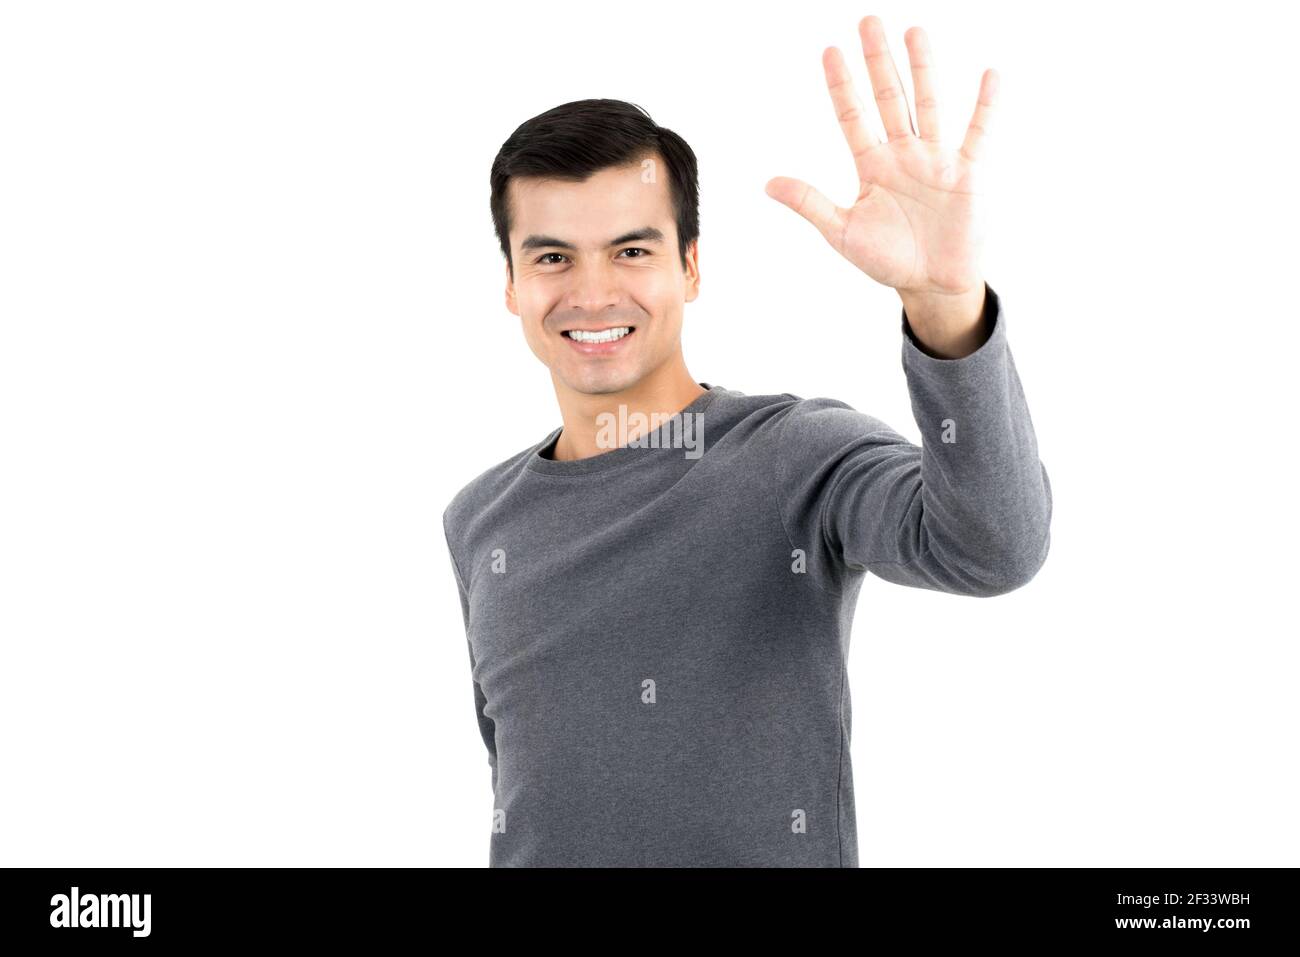 Young man making high five gesture - isolated on white background Stock Photo